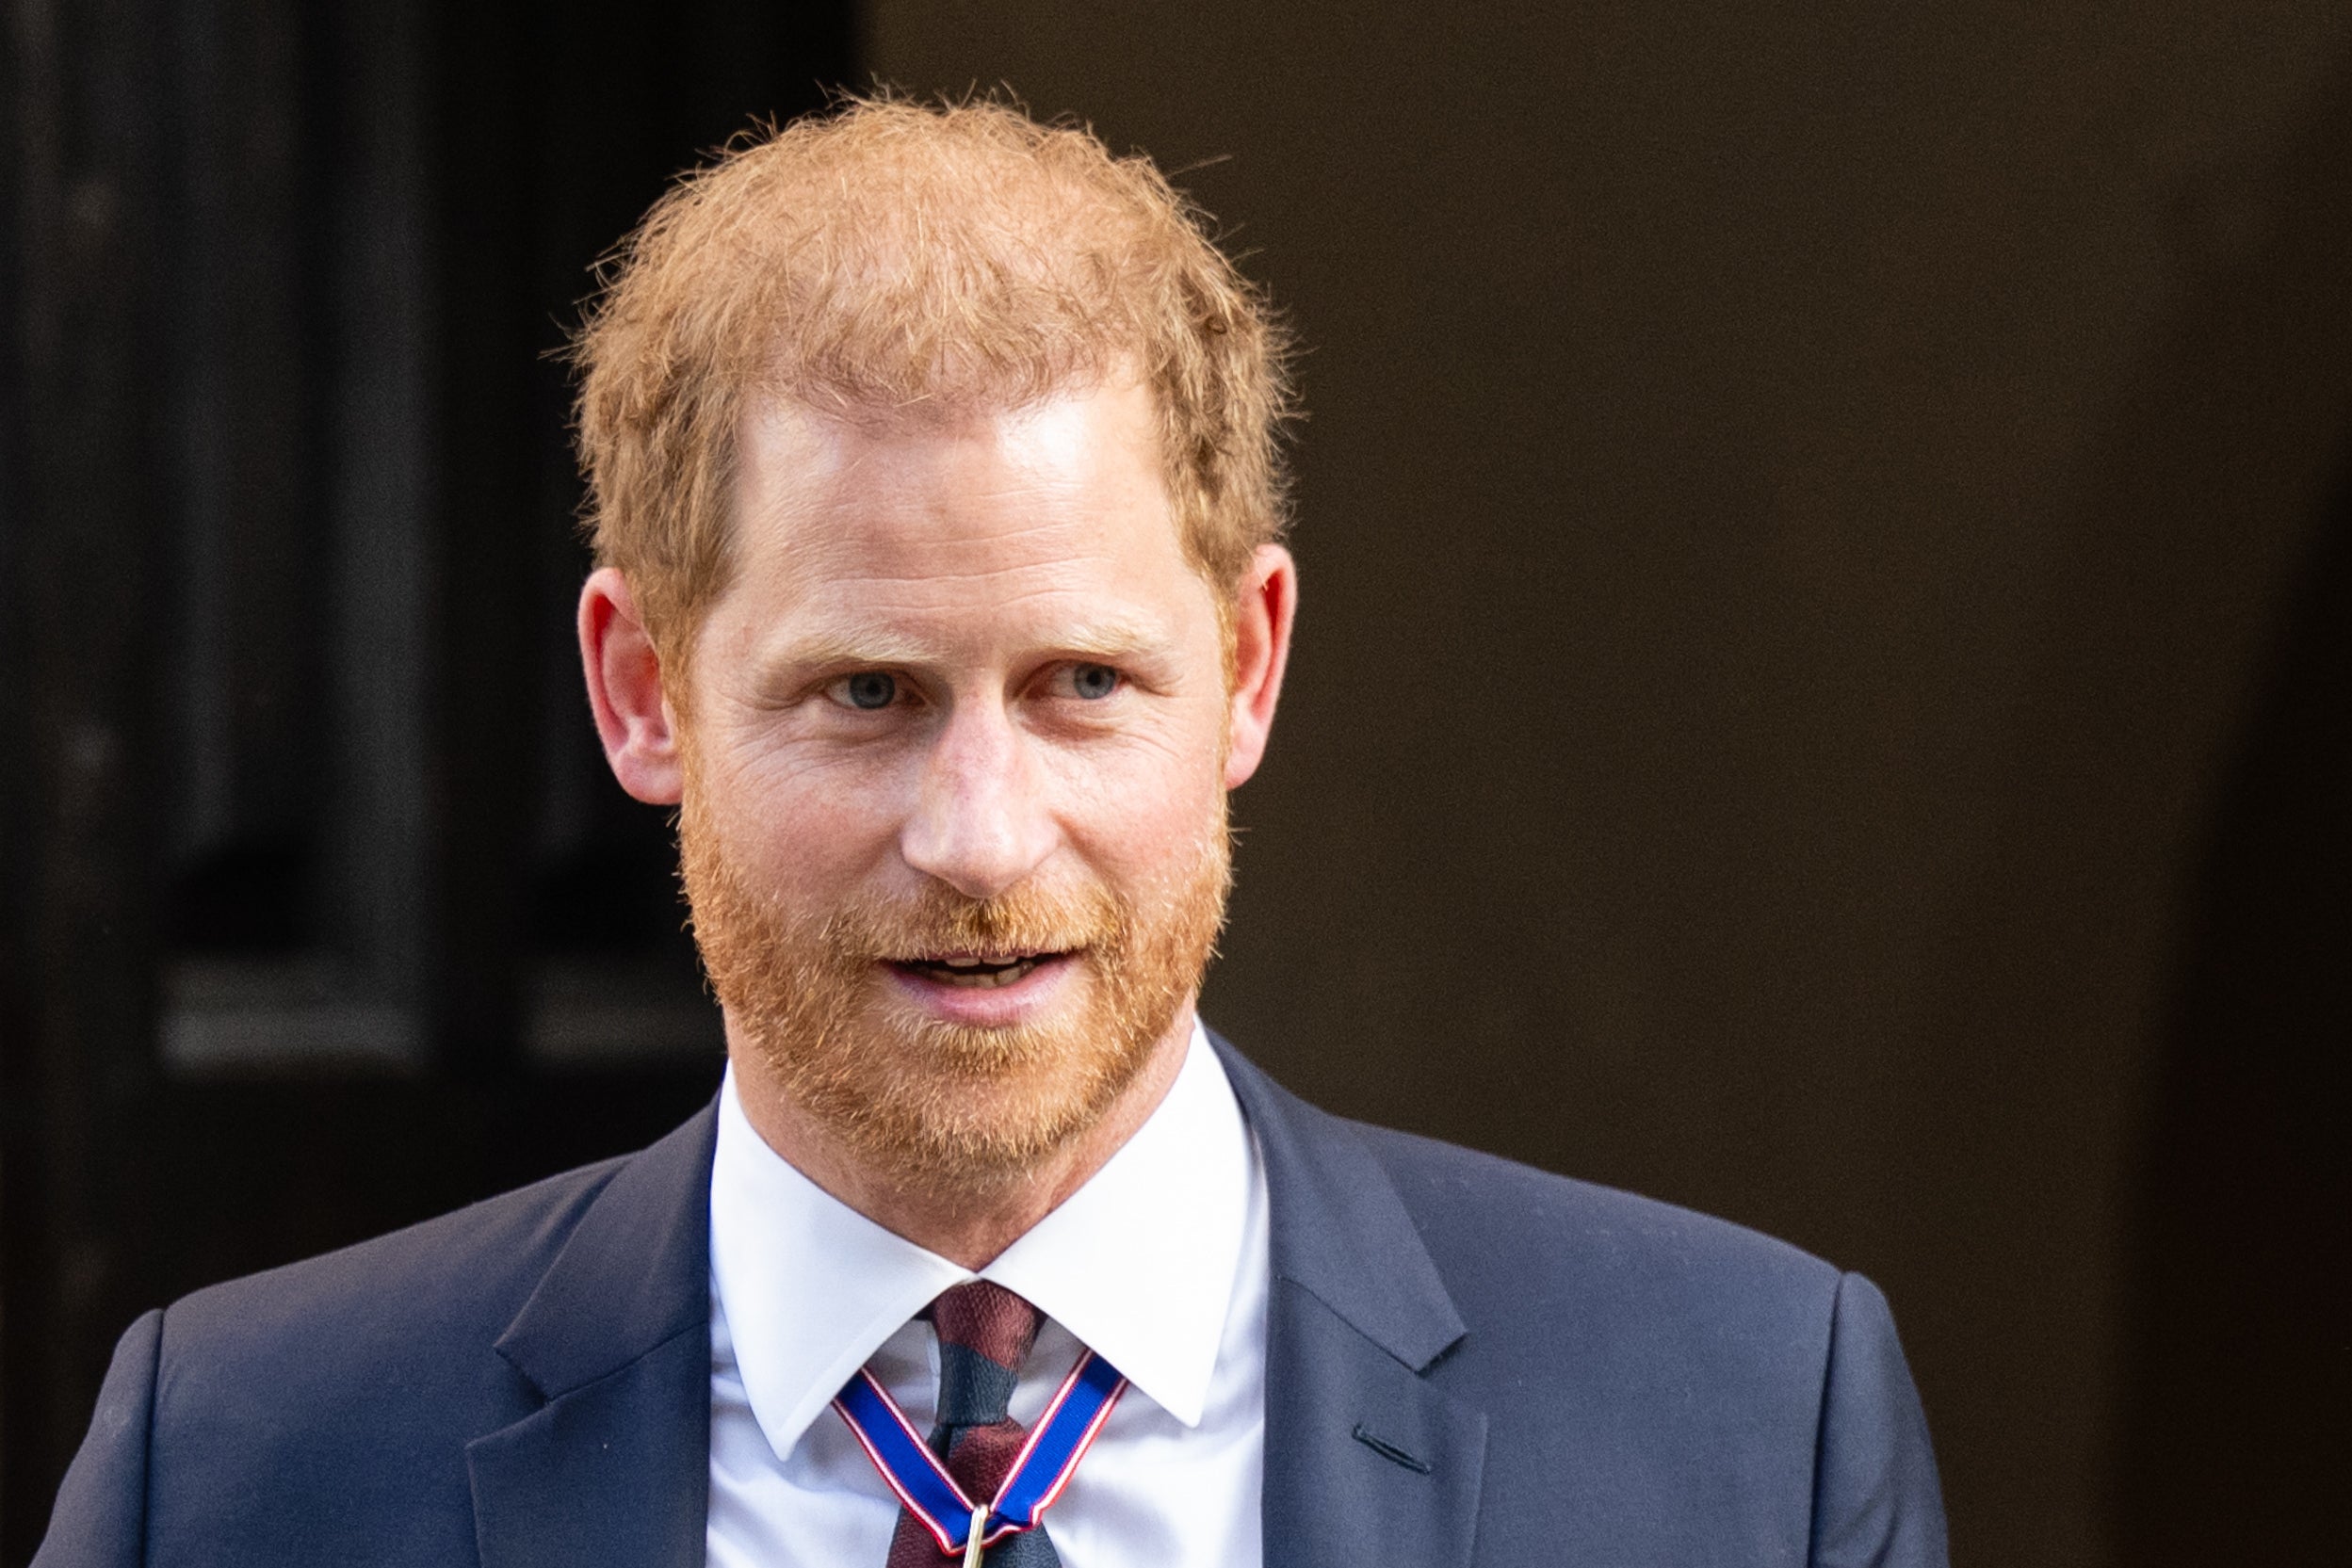 Members Of Princess Diana's Family Showed Support For Prince Harry During U.K. Service